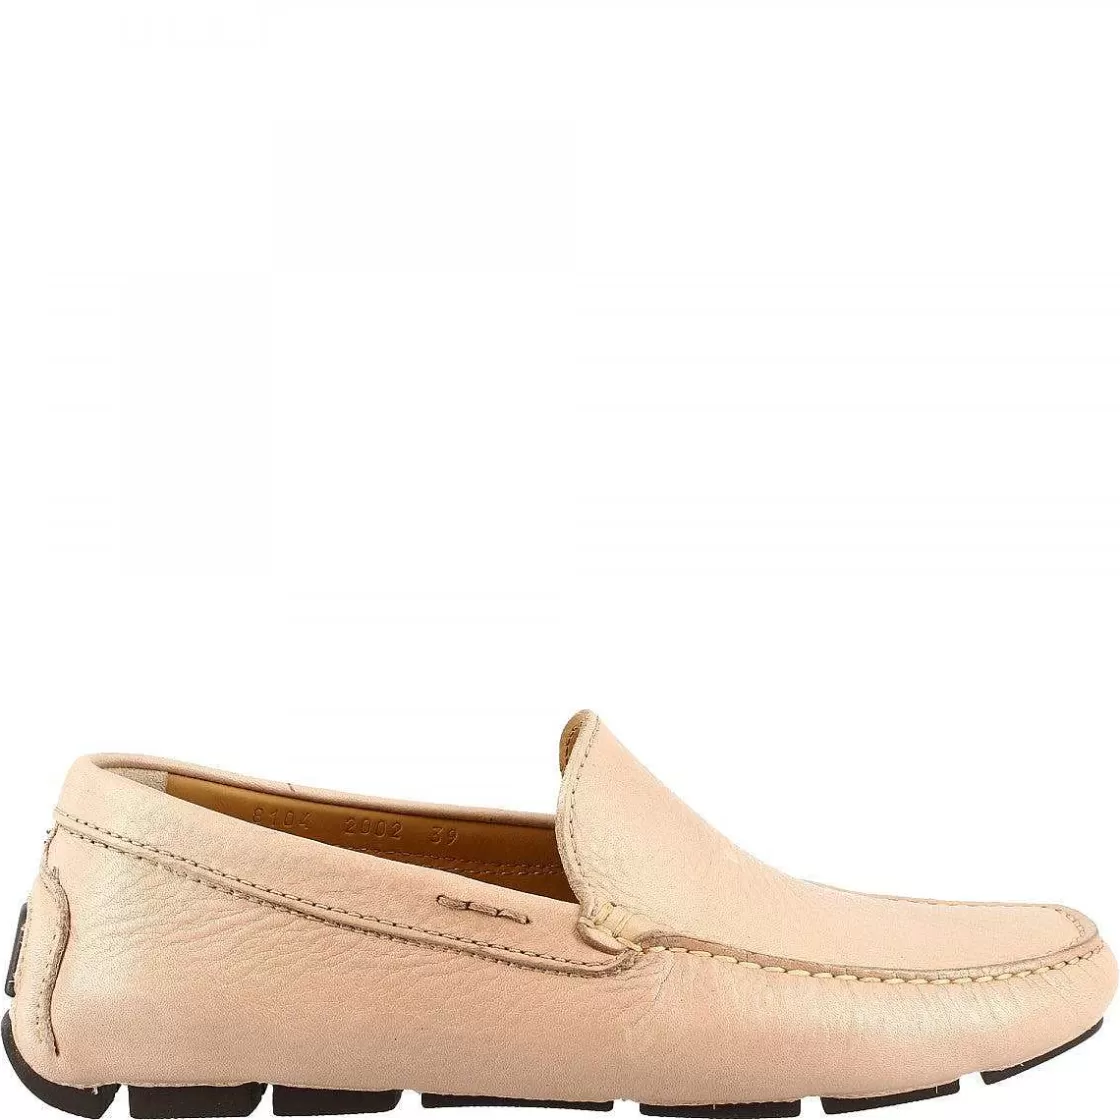 Leonardo Classic Handmade Loafers For Men In Leather Taupe Calfskin With Rounded Toe Discount